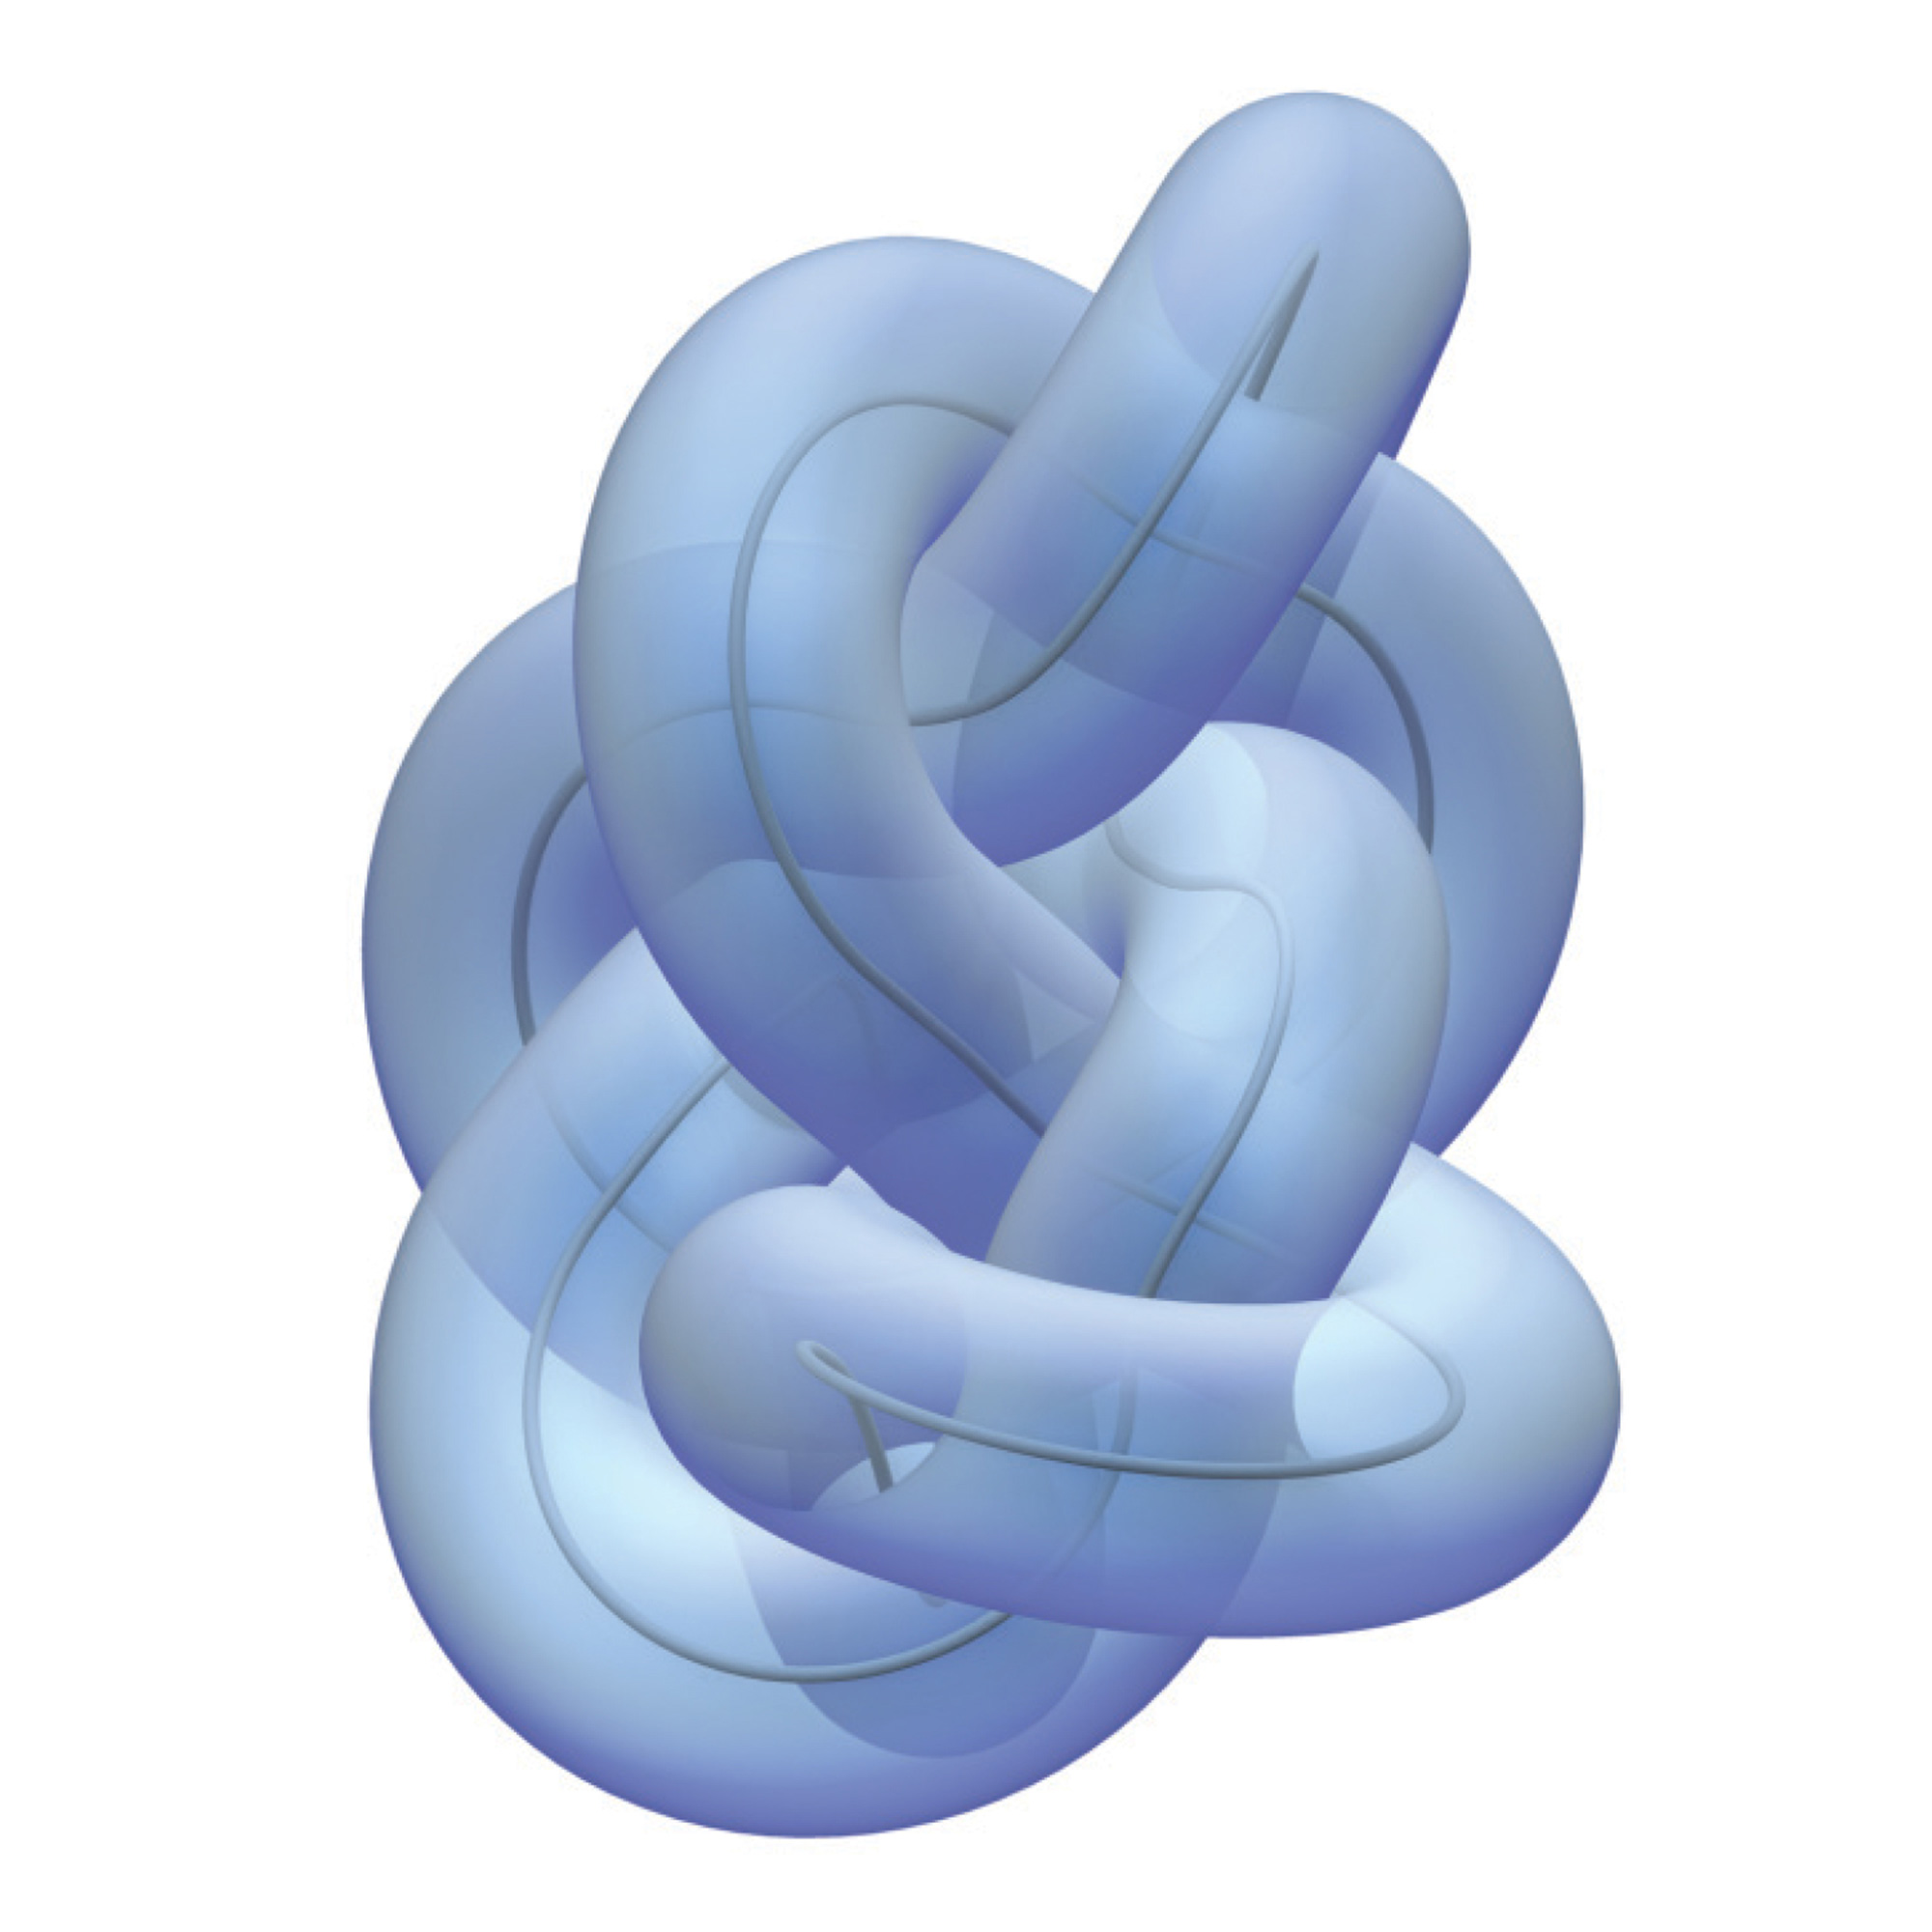 A tight knot, digitally rendered by the program RidgeRunner, with eight crossings and a score of six on the complexity scale.